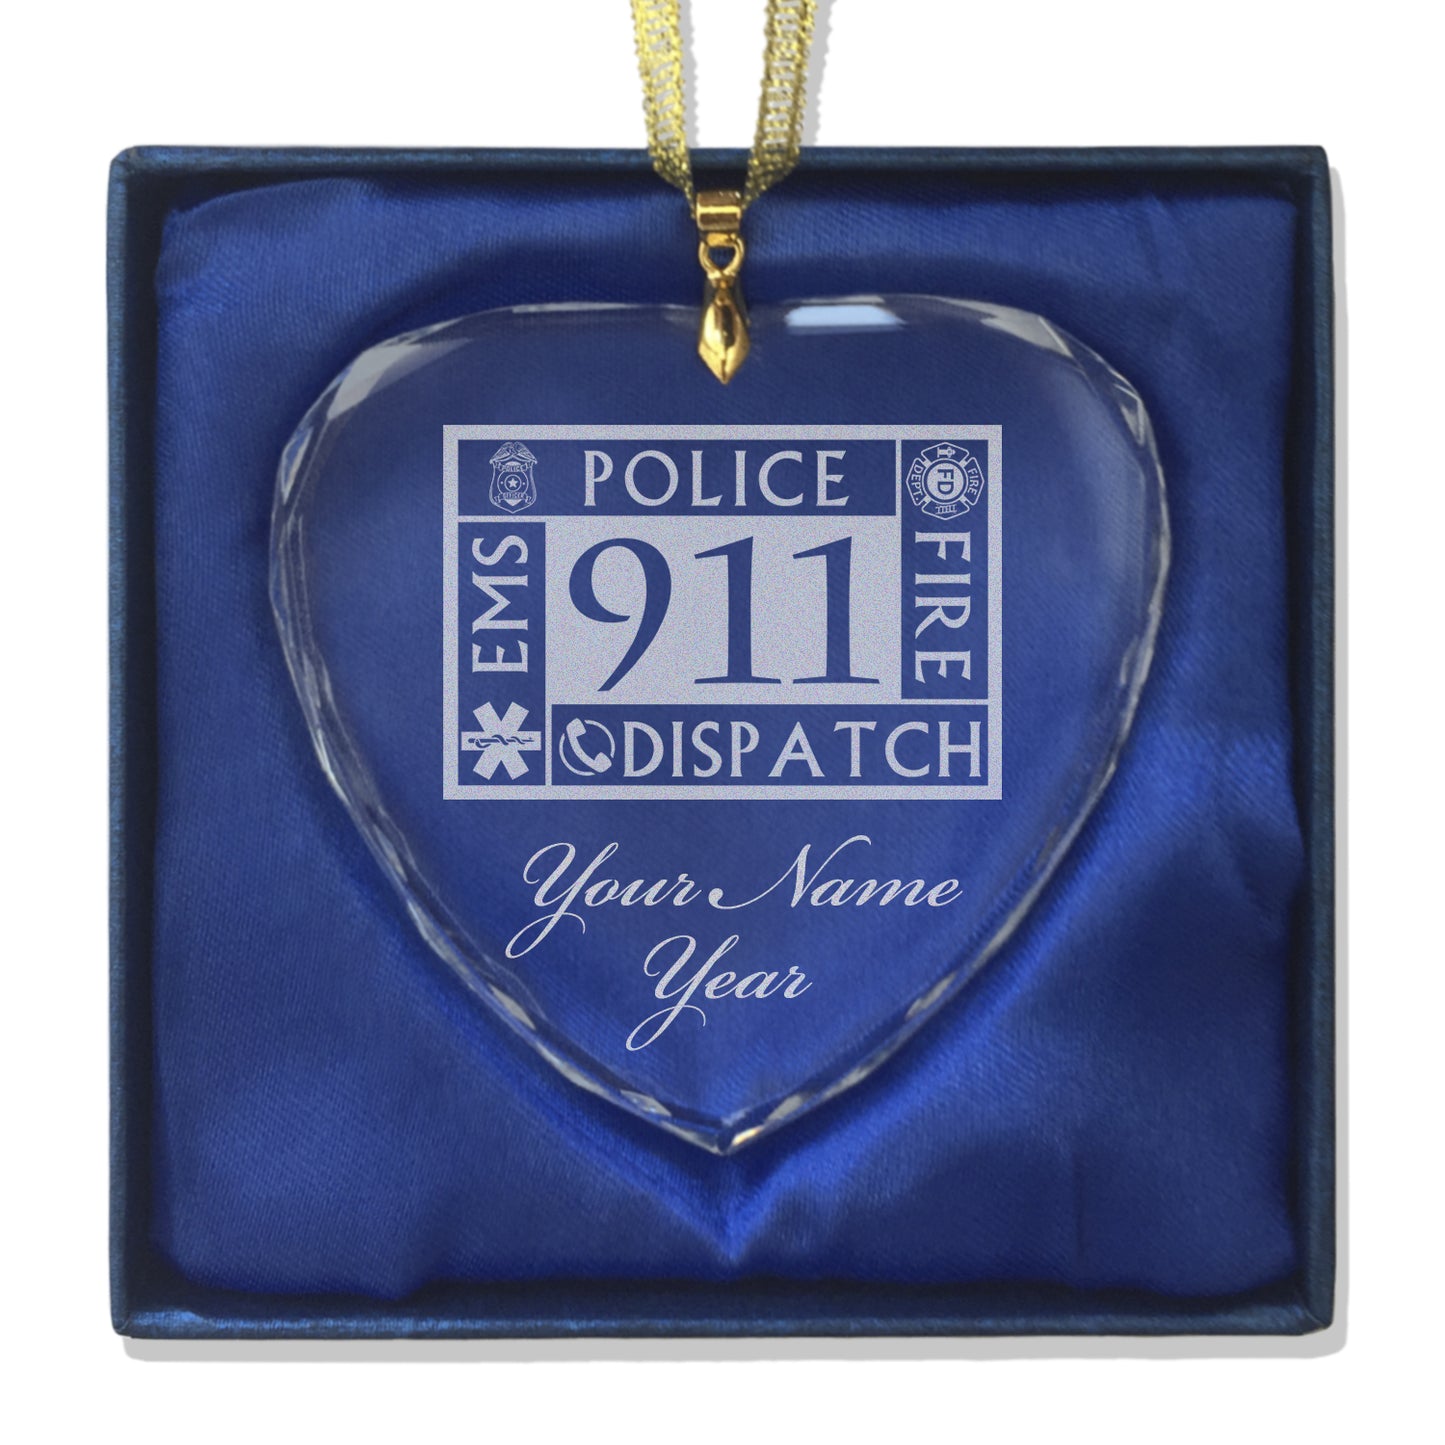 LaserGram Christmas Ornament, Emergency Dispatcher 911, Personalized Engraving Included (Heart Shape)